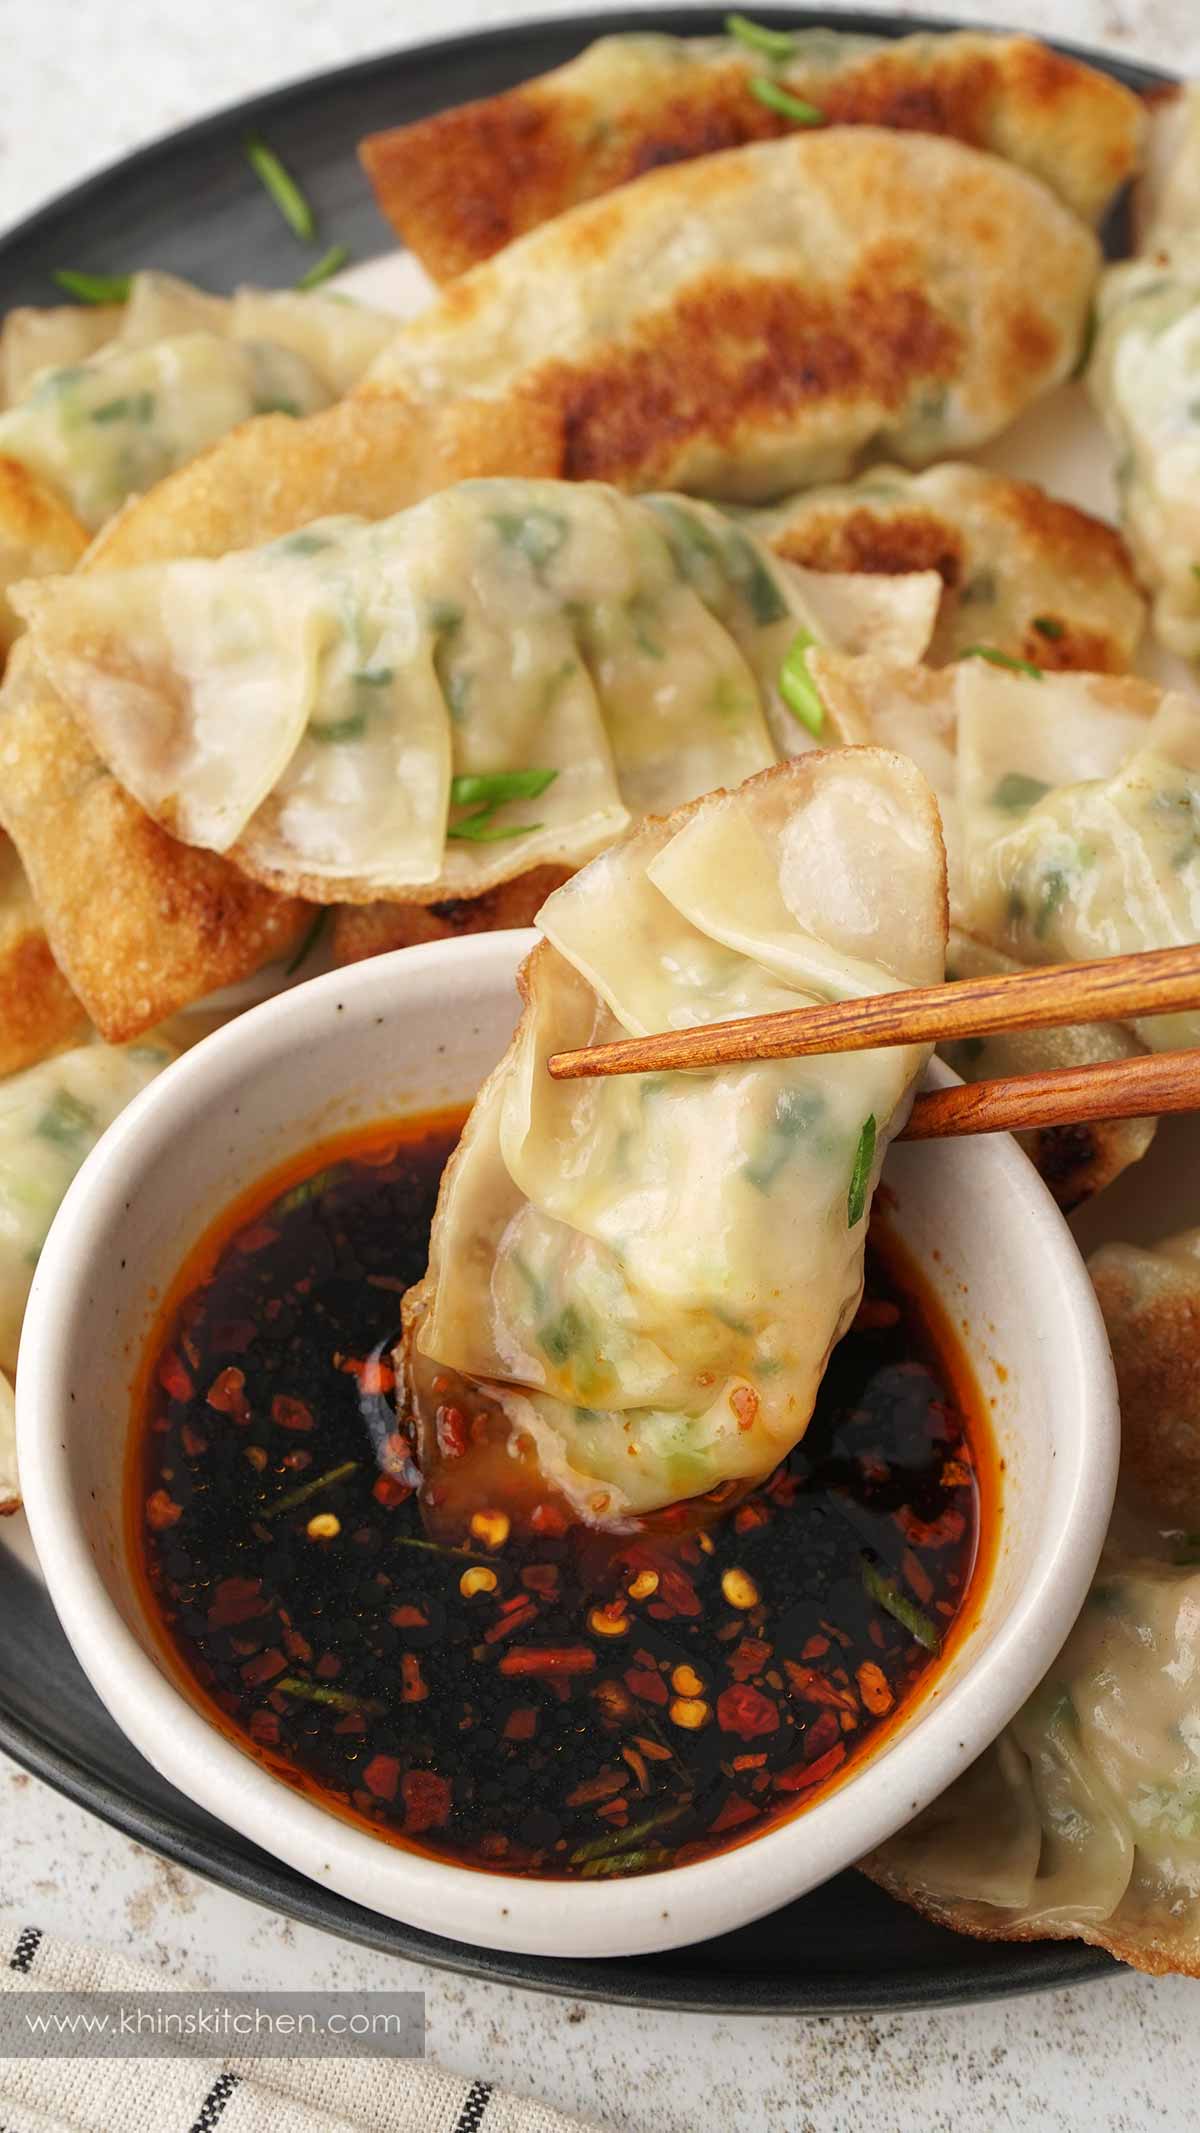 An image showing a pair of chopsticks holding Japanese pan-fried prawn dumplings, dipped in the sauce.